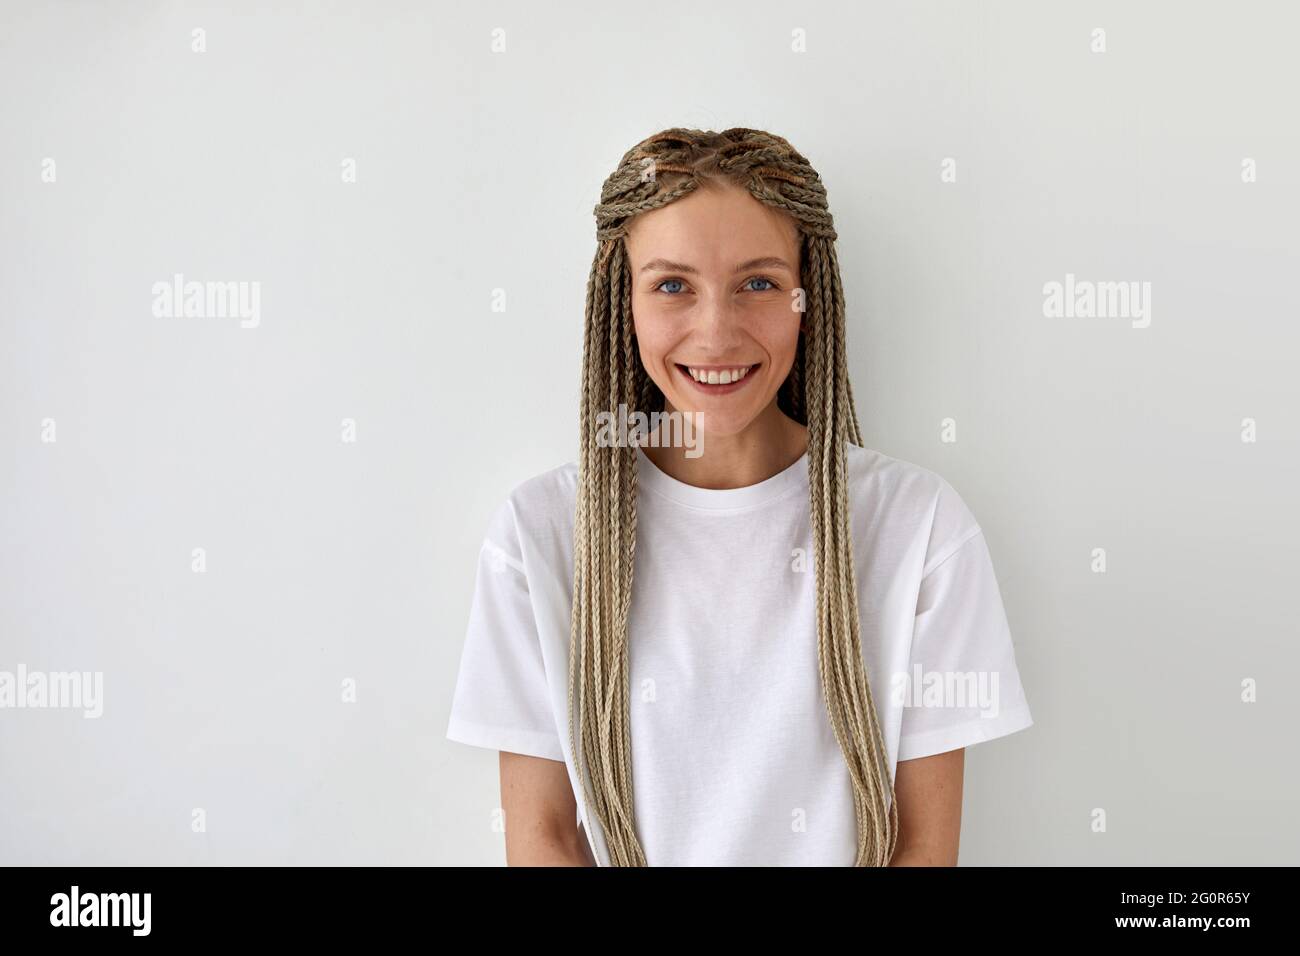 Cheerful attractive female with braids wearing casual white shirt standing on light background and looking at camera Stock Photo